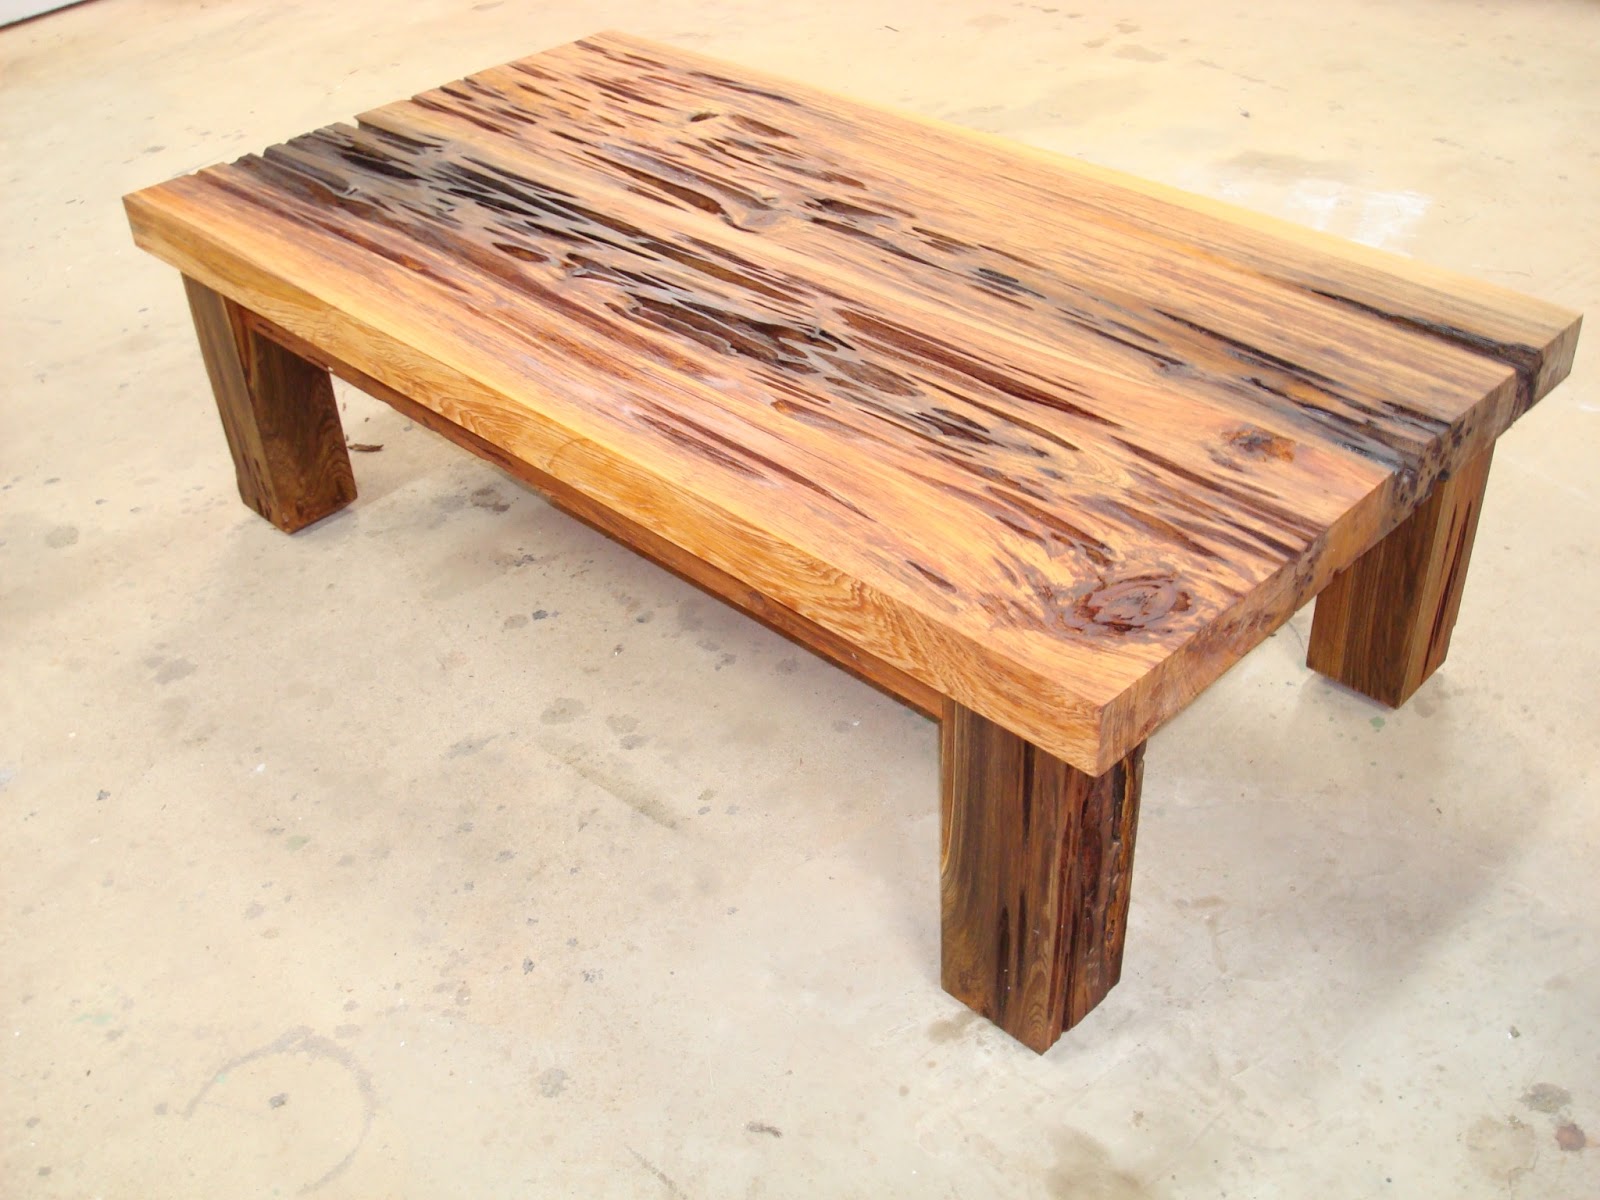 Handcrafted Rustic Cypress Tables - ALL Wood Furniture